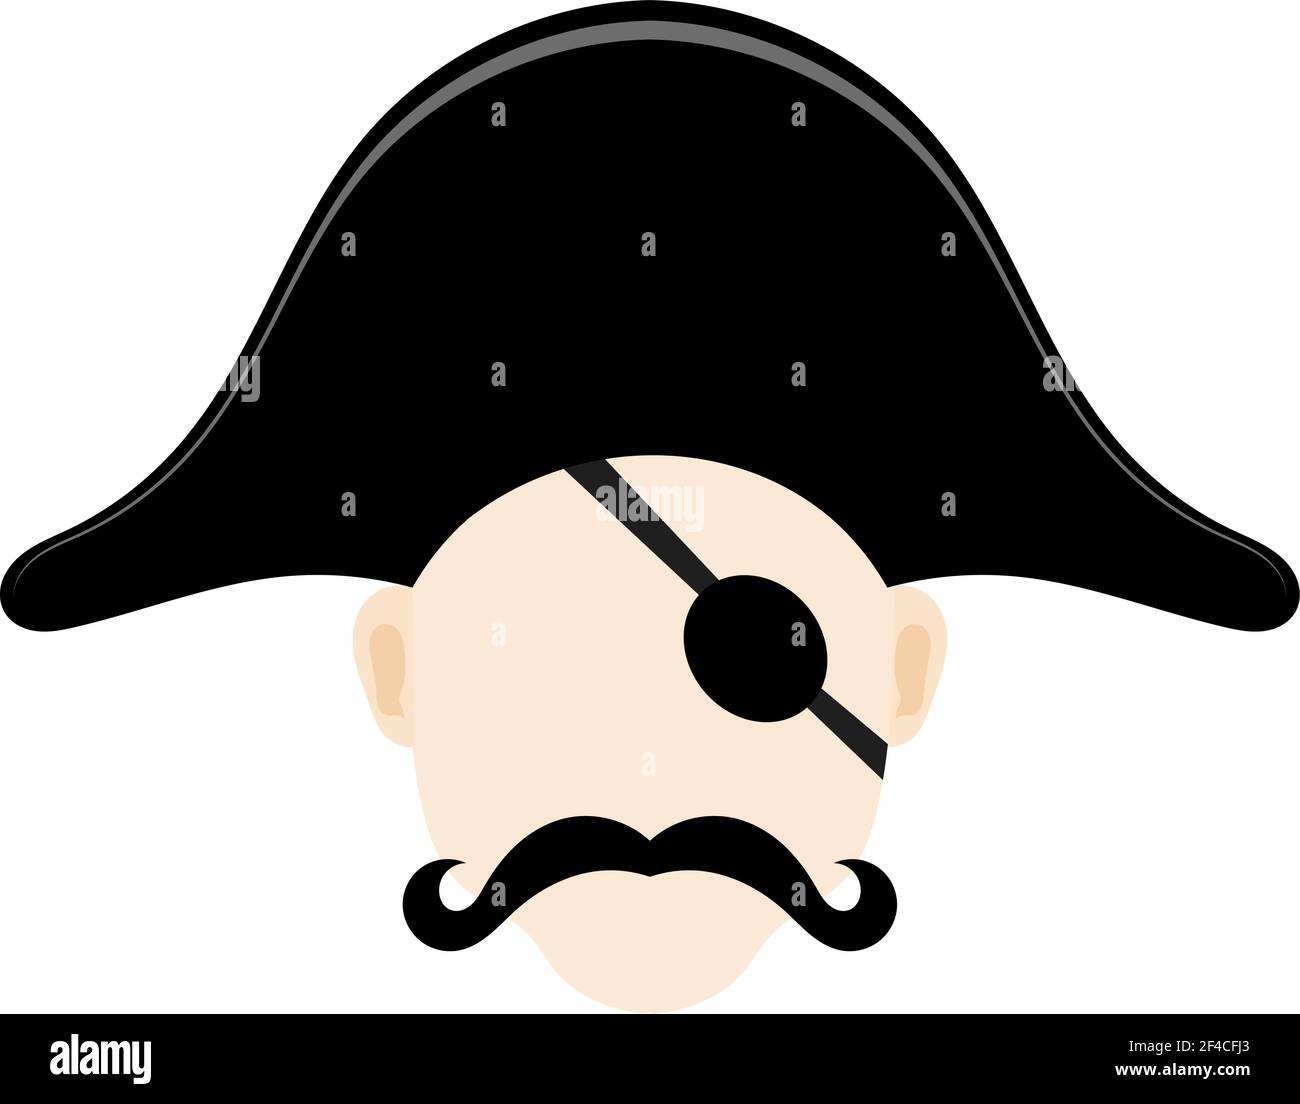 Vector illustration of a pirate head a cocked hat with an eye patch and a mustache. Vector icons for web site design. Stock illustration Stock Vector